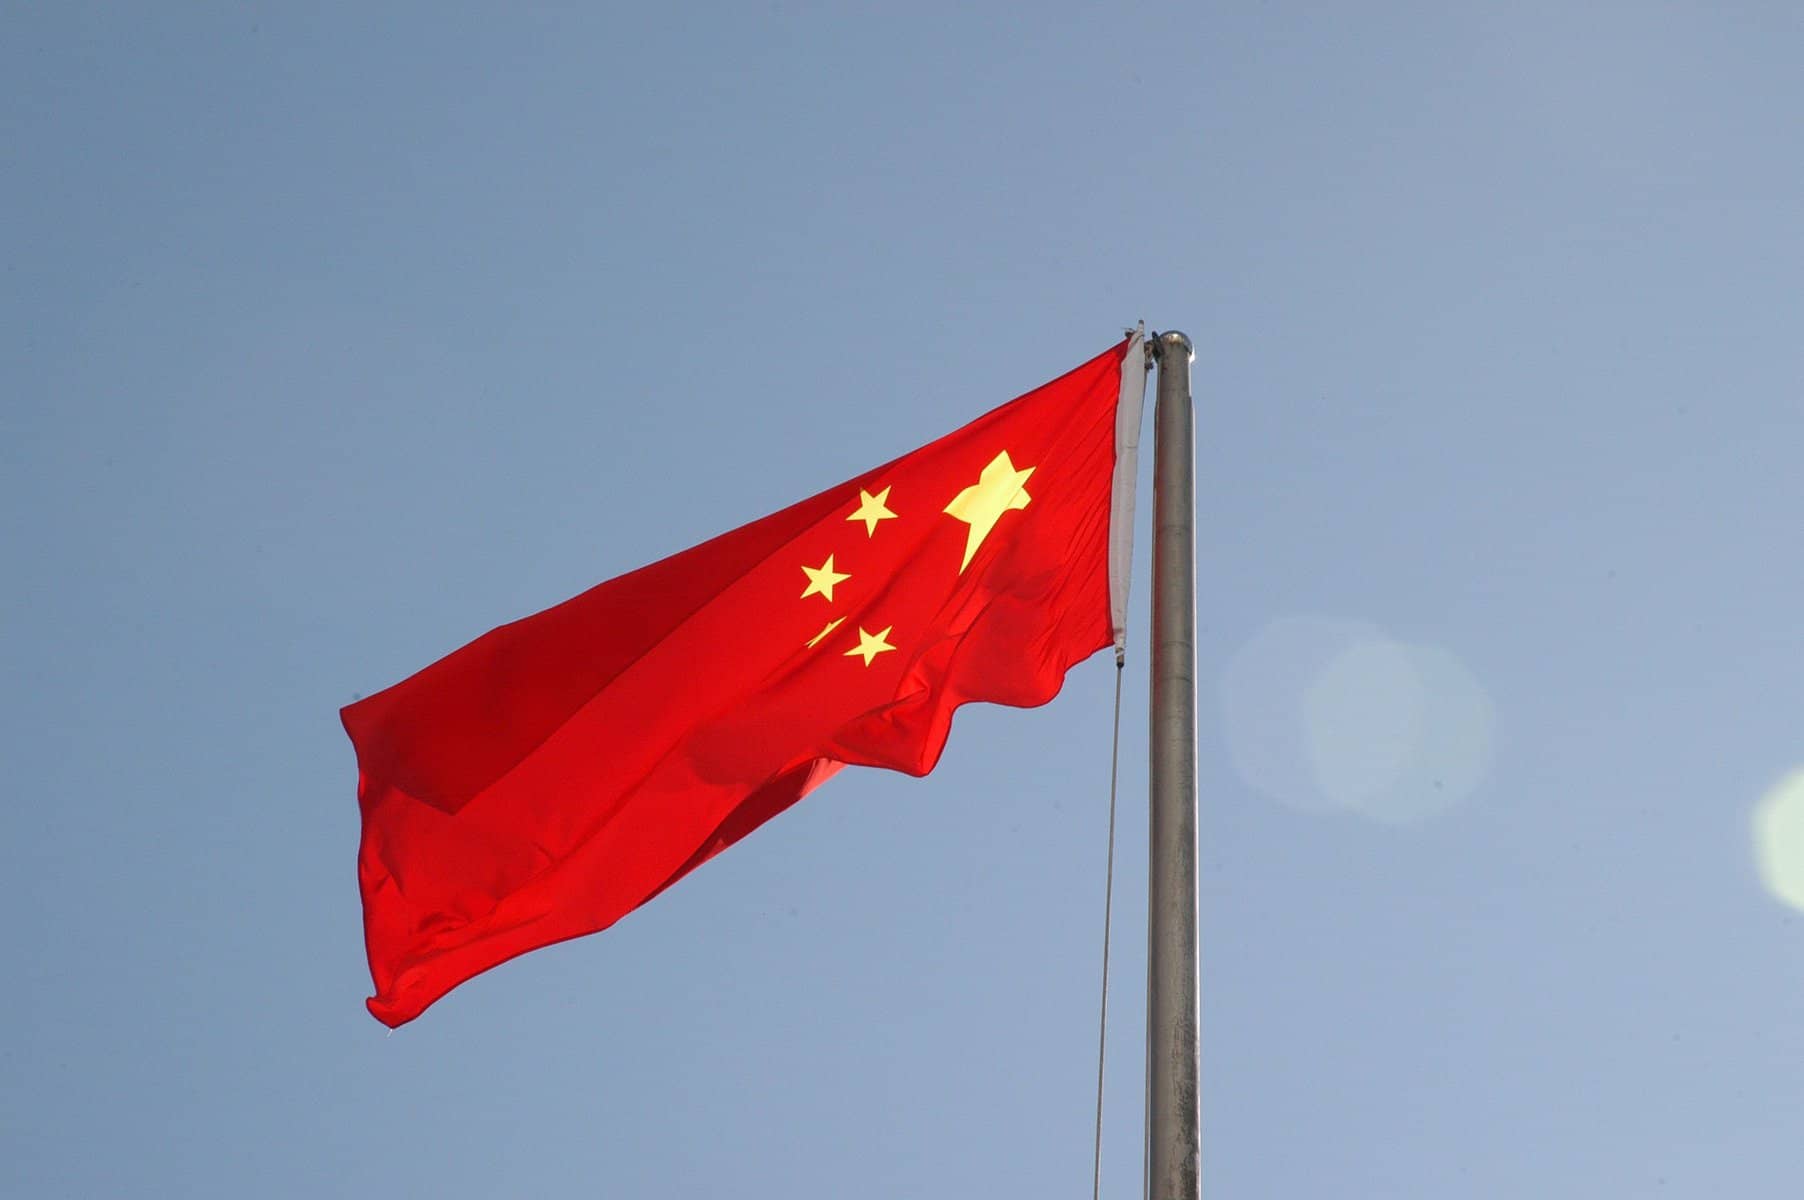 The flag of China waves against a grey sky.